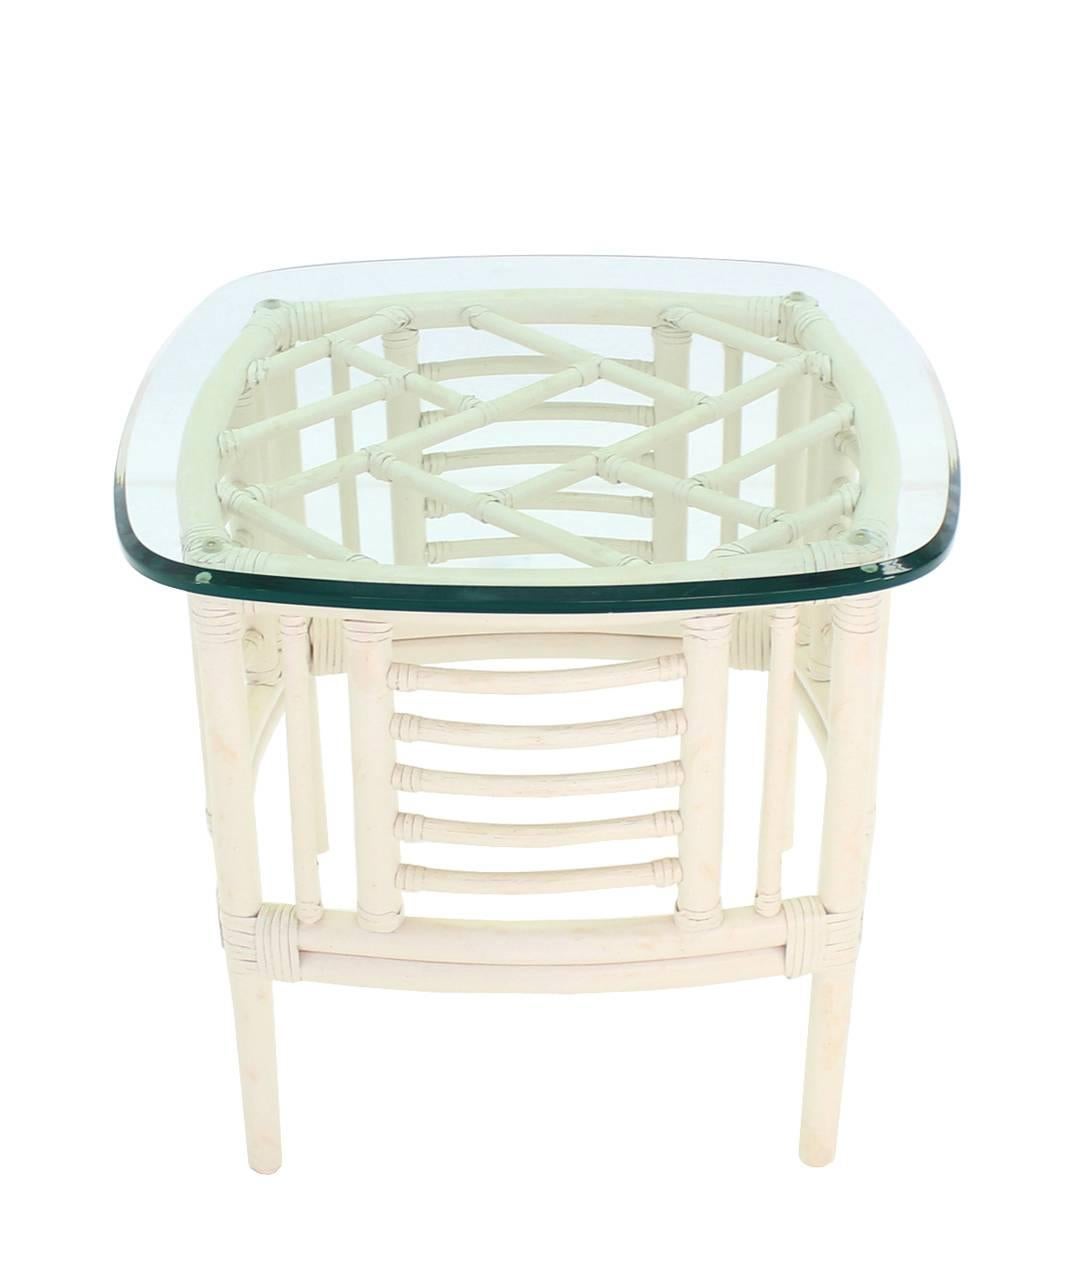 white wicker side table with glass top